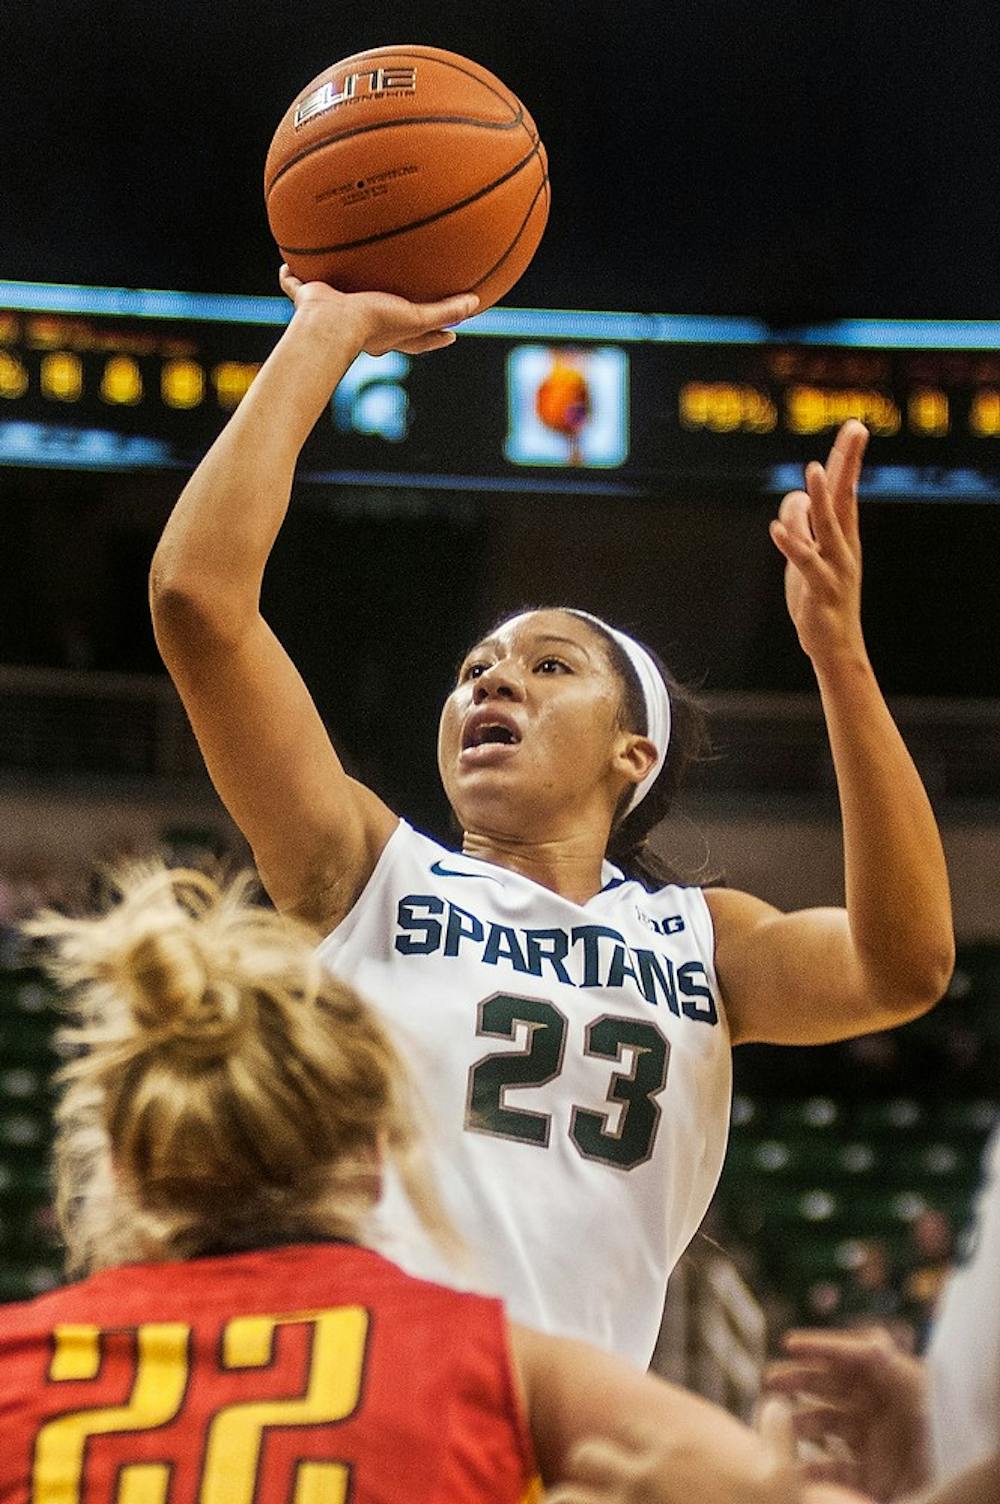 	<p>Redshirt freshman guard Aerial Powers goes for a jumpshot during the game against Ferris State, Oct. 30, 2013, at Breslin Center. The Spartans beat the Bulldogs, 101-52. Danyelle Morrow/The State News</p>